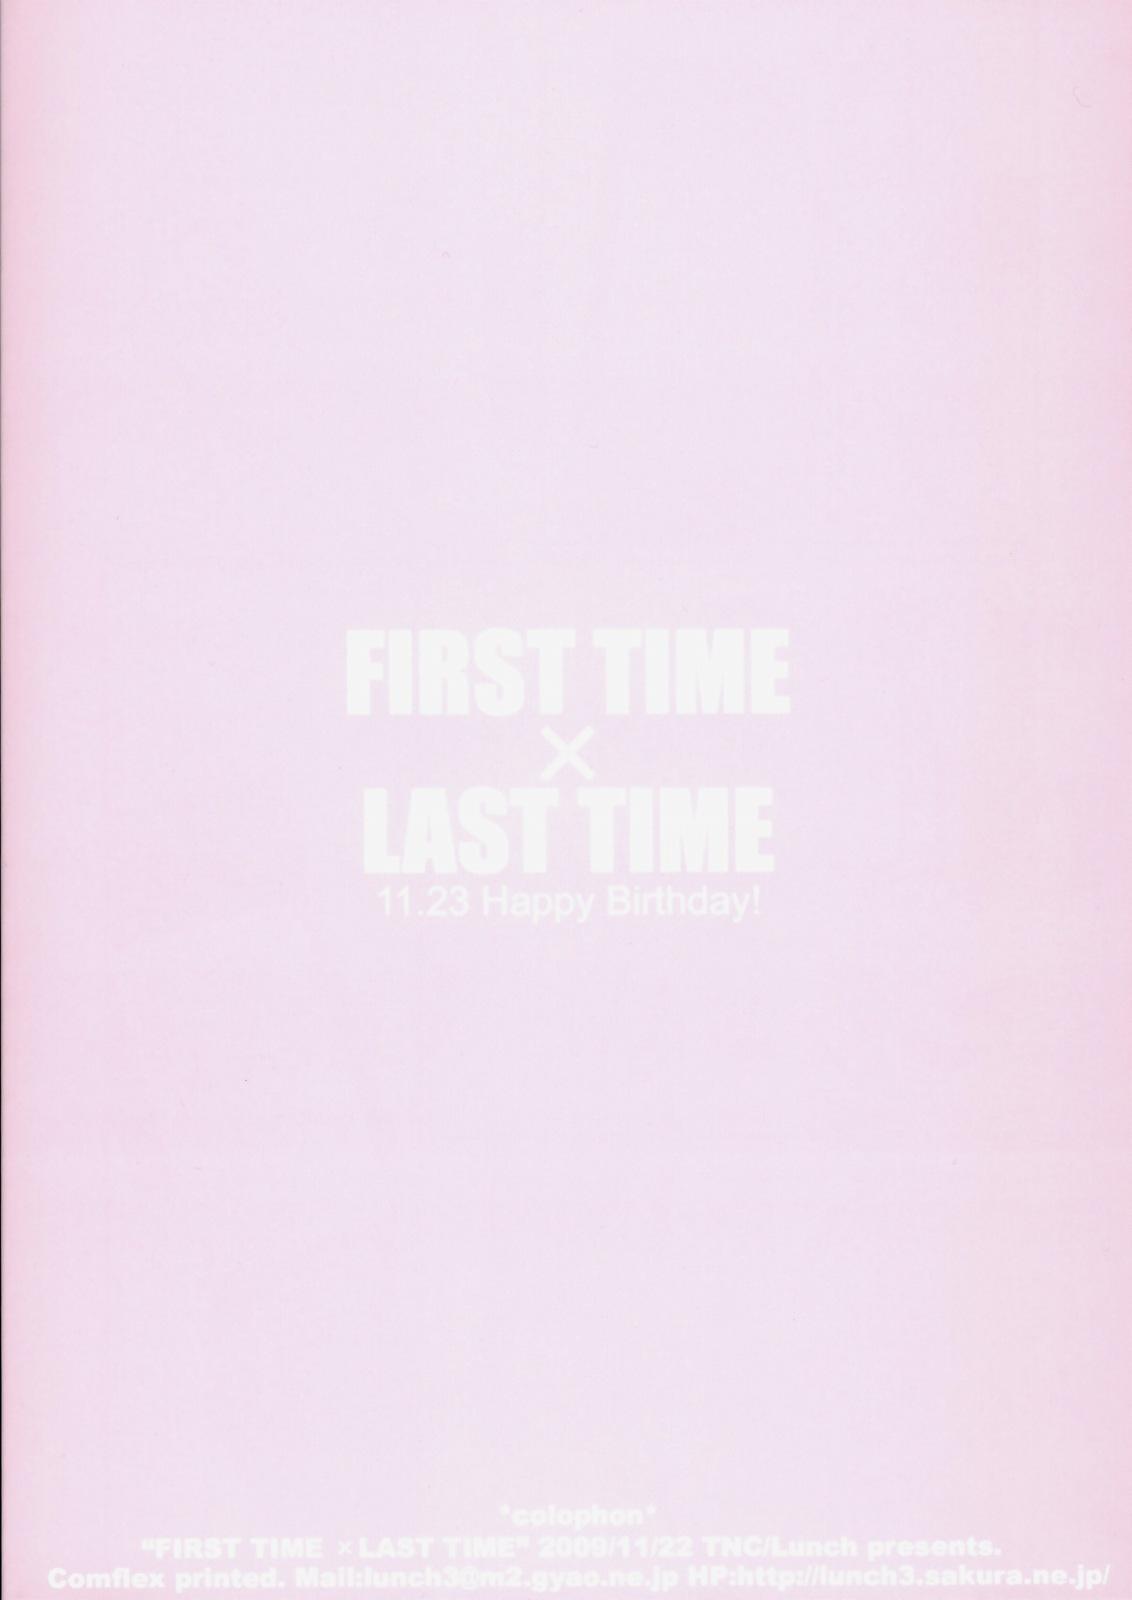 FIRST TIME × LAST TIME 39